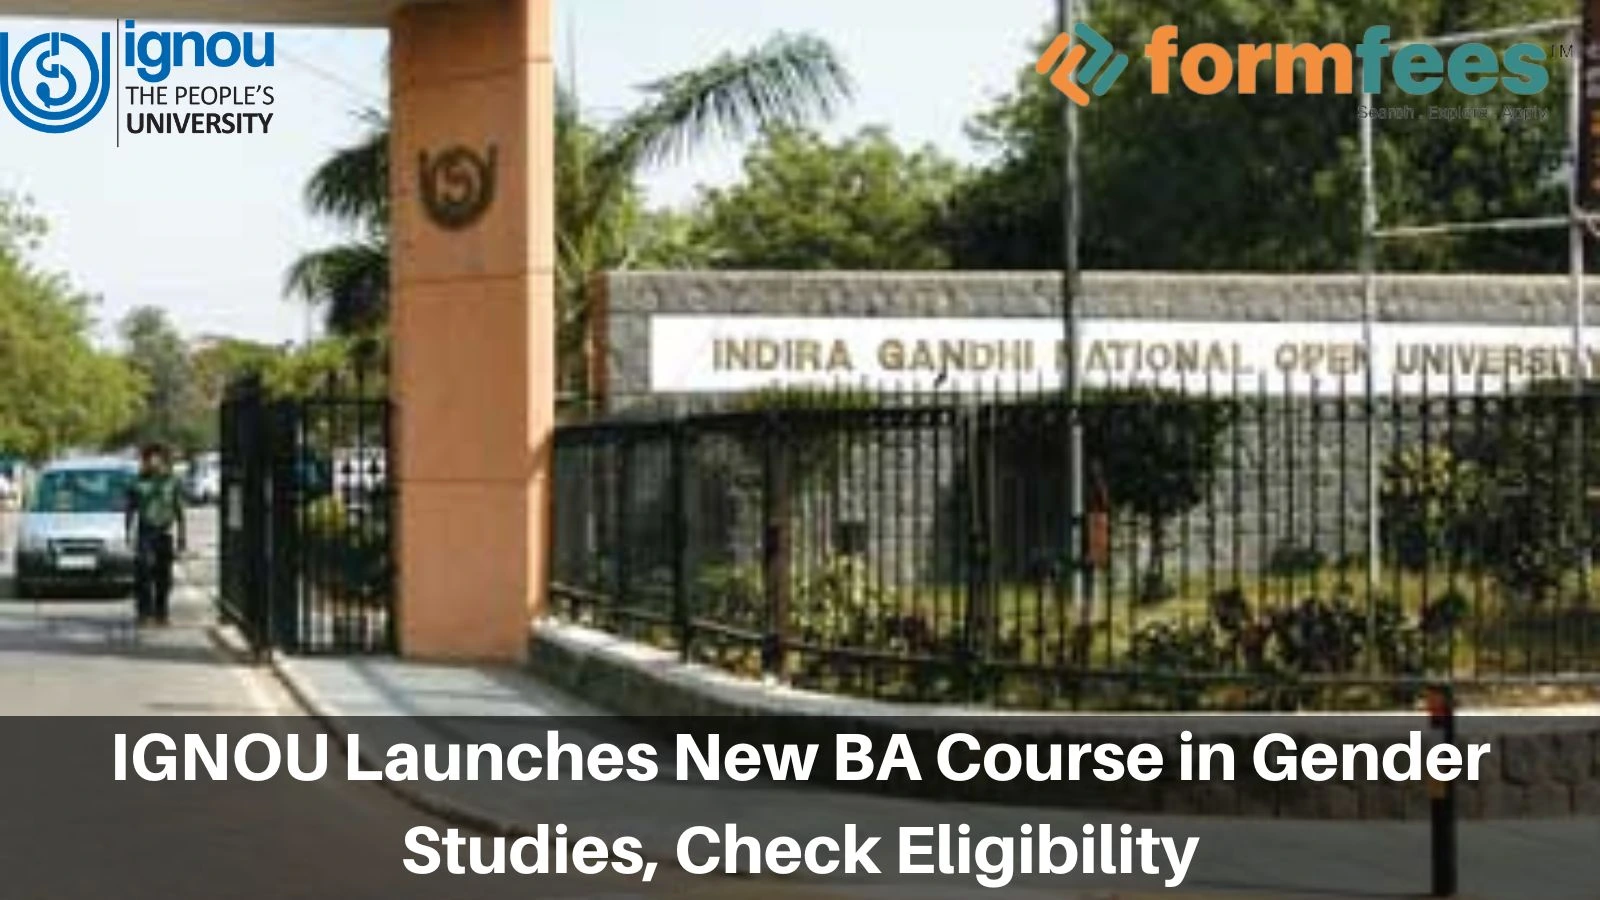 IGNOU Launches New BA Course in Gender Studies, Check Eligibility